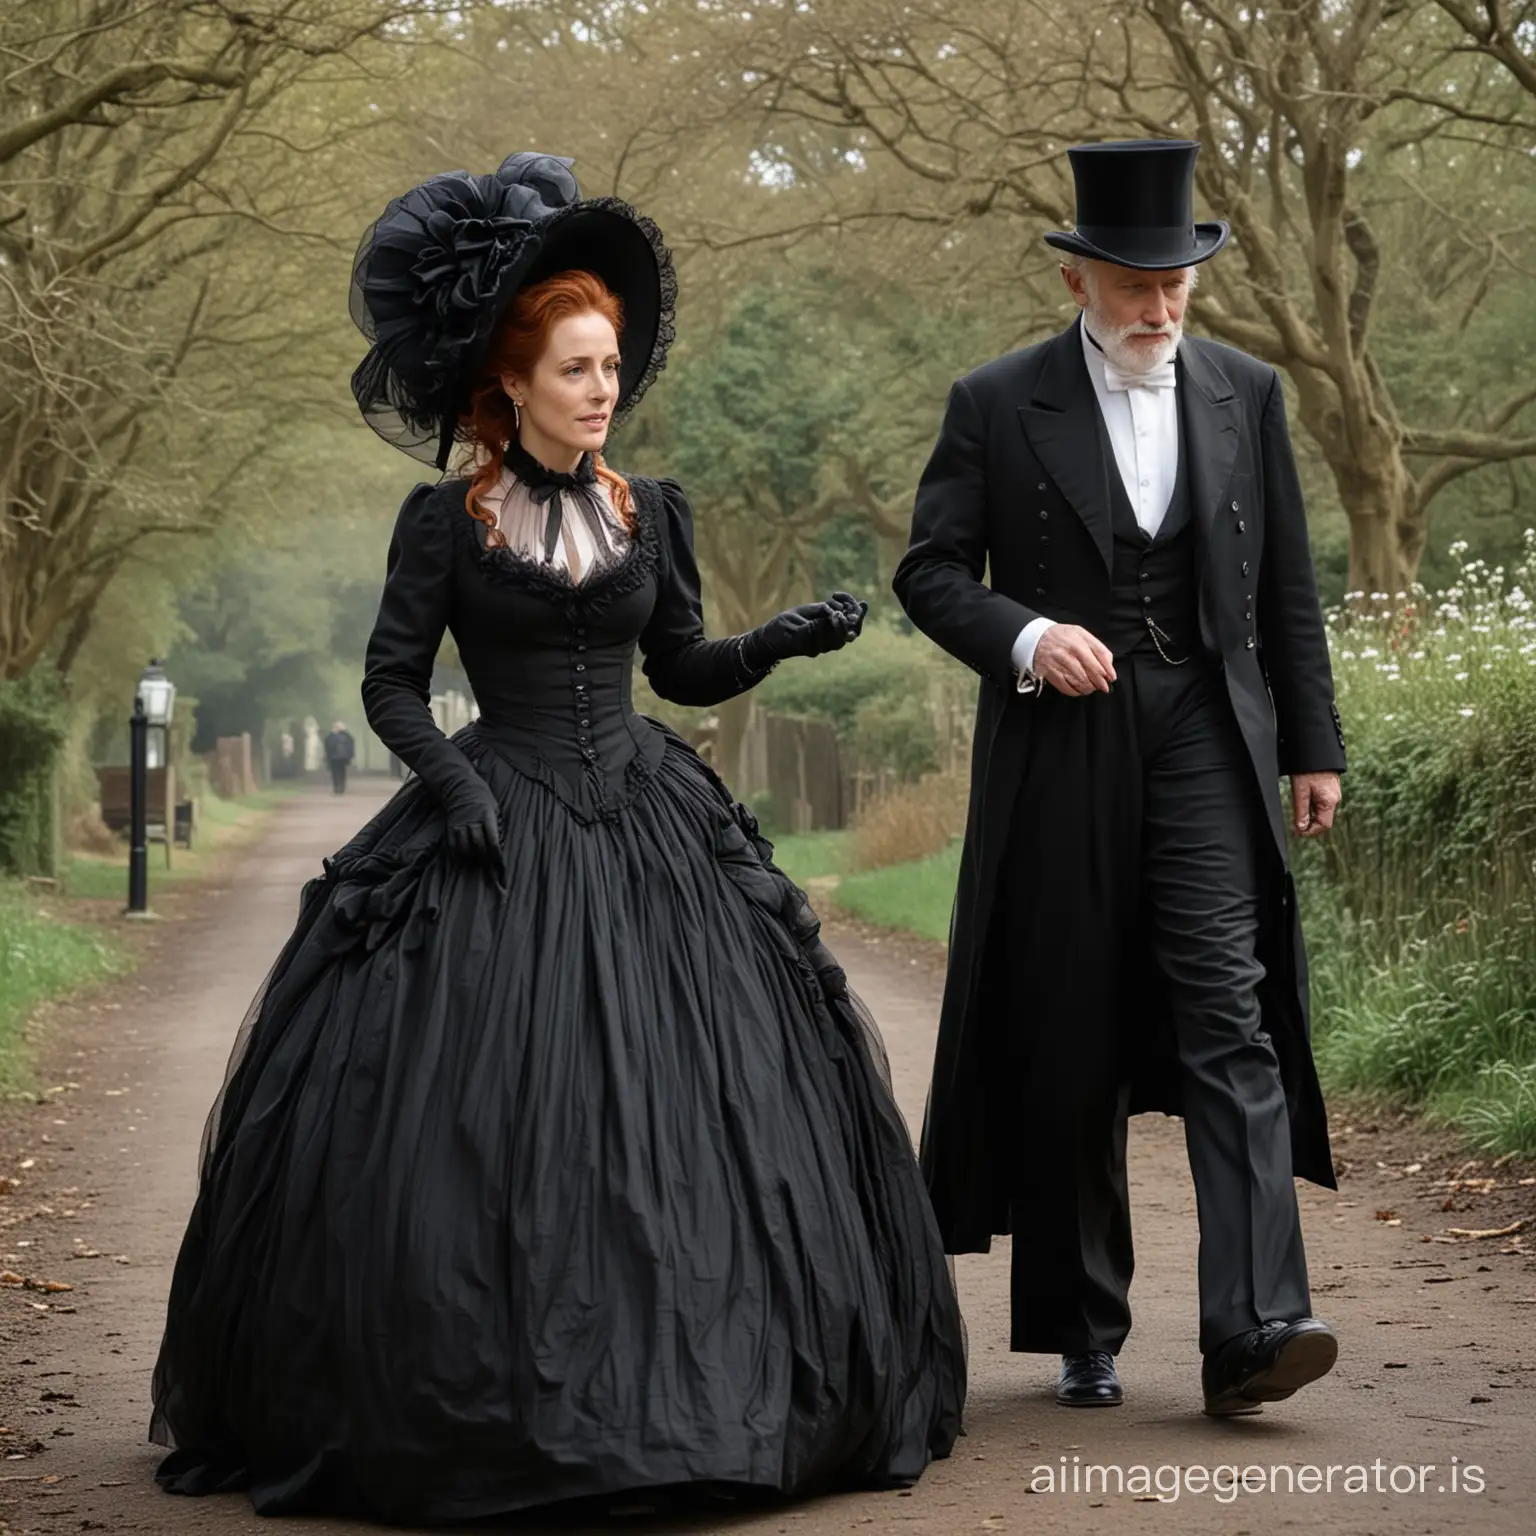 Elegant-Victorian-Newlyweds-Gillian-Anderson-in-Red-Hair-and-Billowing-Black-Crinoline-Dress